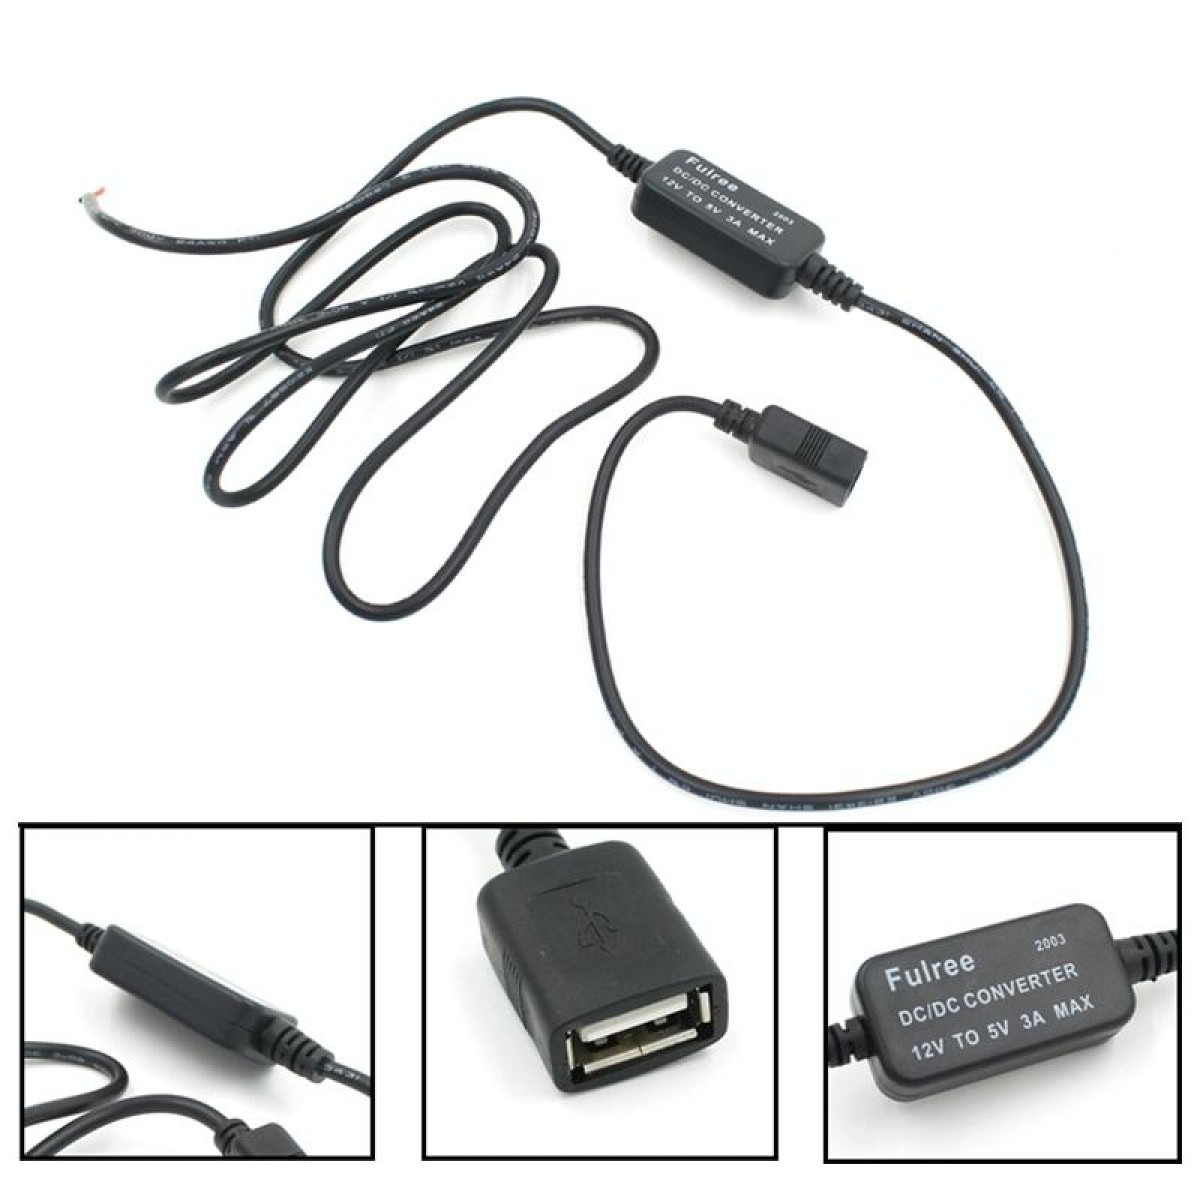 Car Motorcycle Single USB Car Charger DC 12V To 5V 3A Power Adapter for Car GPS Tracker DVR, Length: 1m